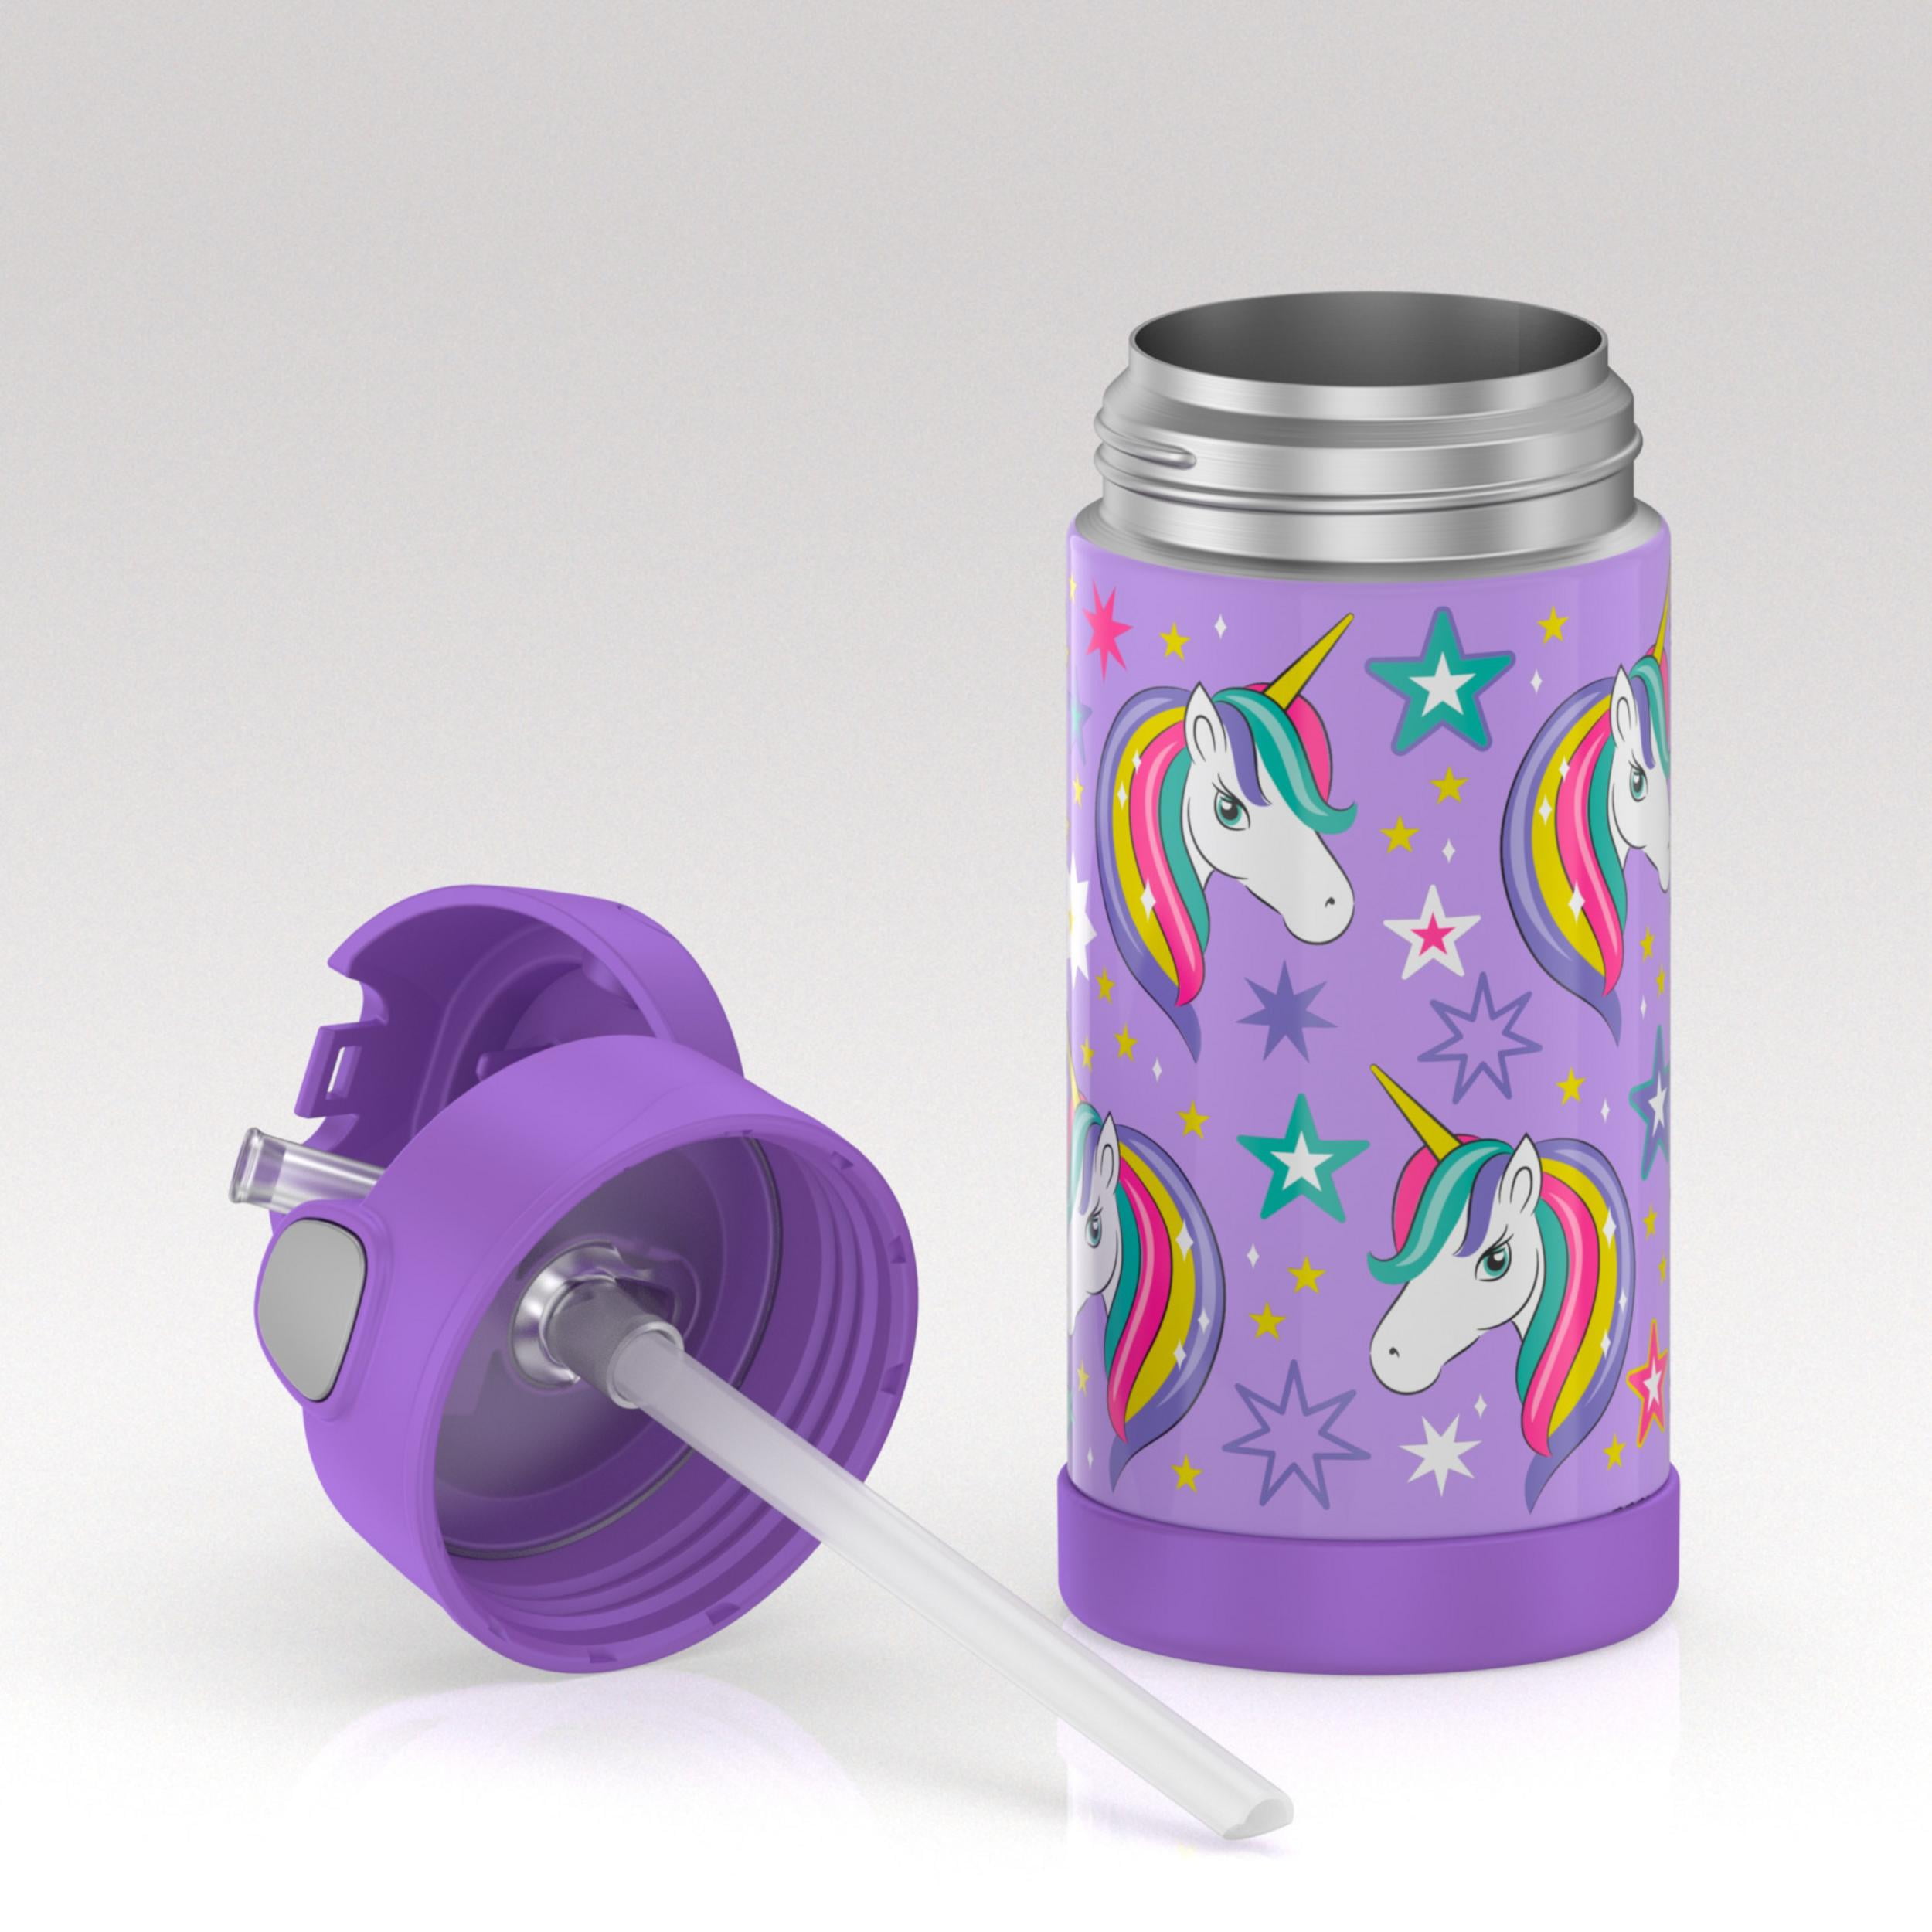 Sonic 12oz Water Bottle Insulated Stainless Steel Kid's Funtainer